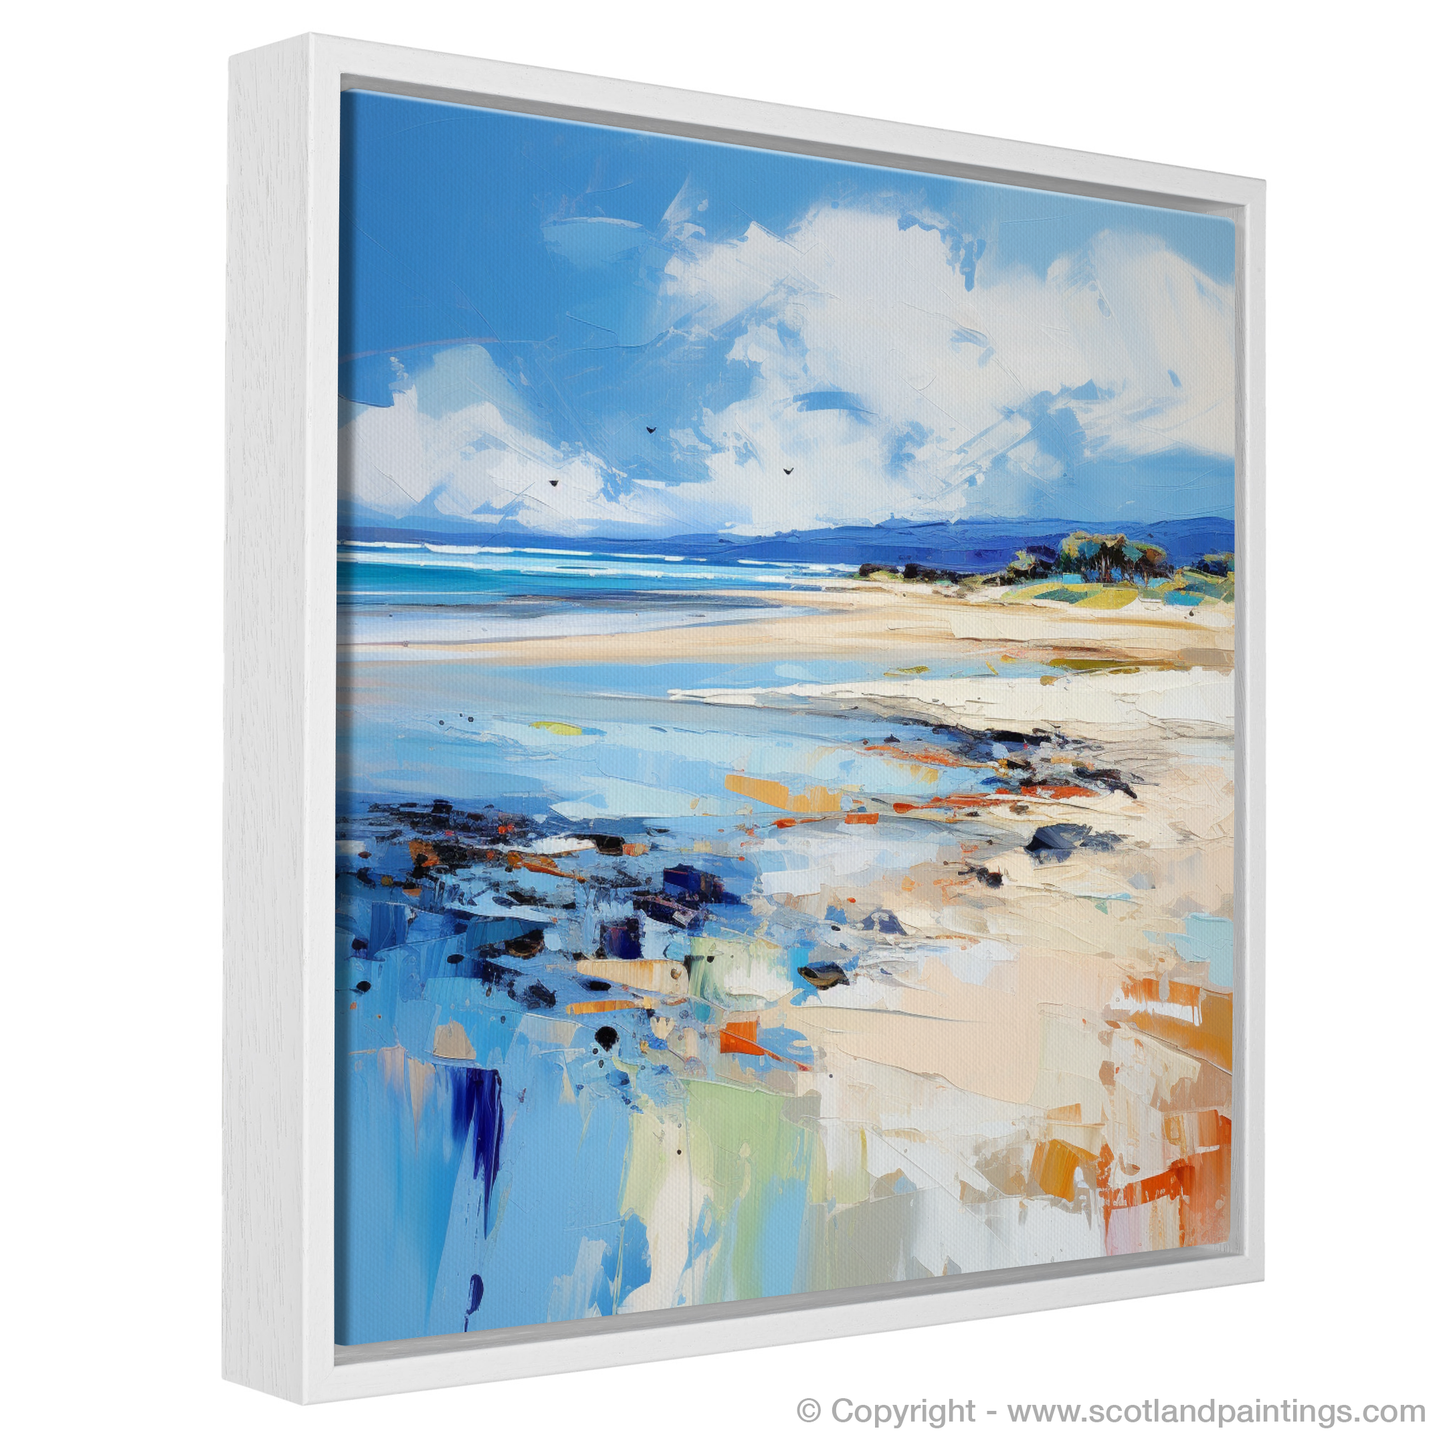 Painting and Art Print of Nairn Beach, Nairn entitled "Ethereal Shores of Nairn Beach".